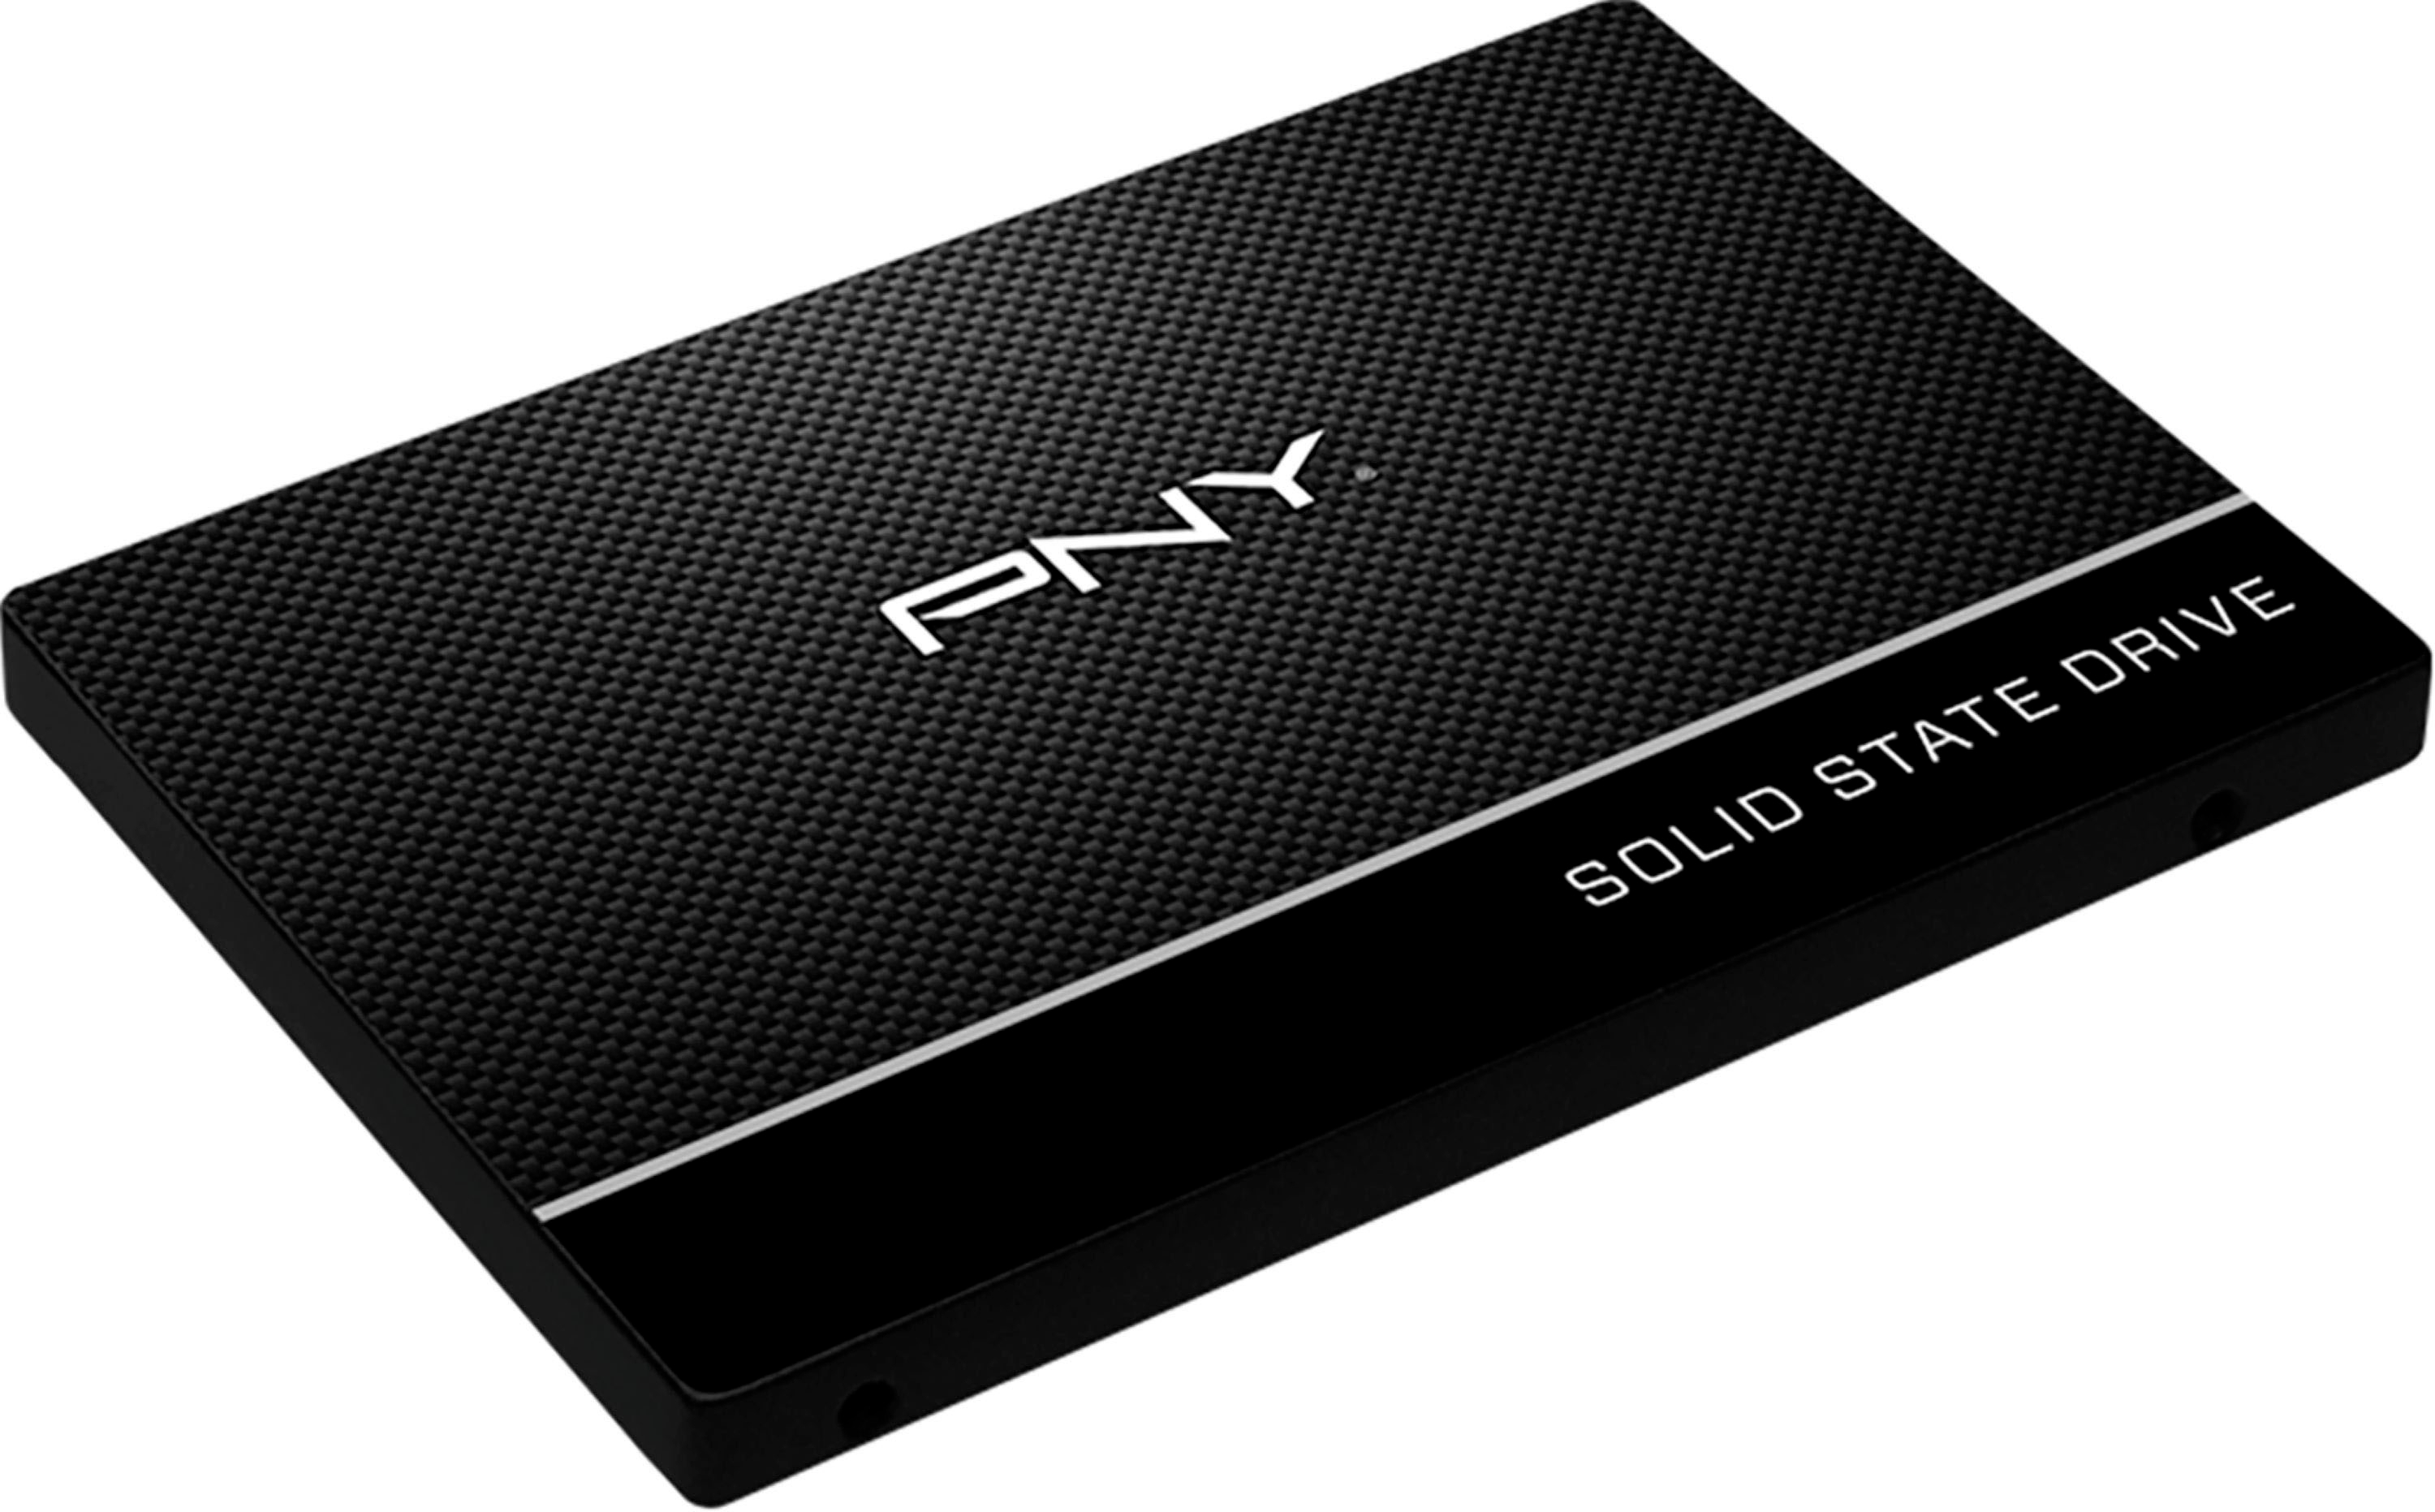 Cs900 Pny 240Gb Solid State Drive at Rs 2899, PNY SSD in Pune